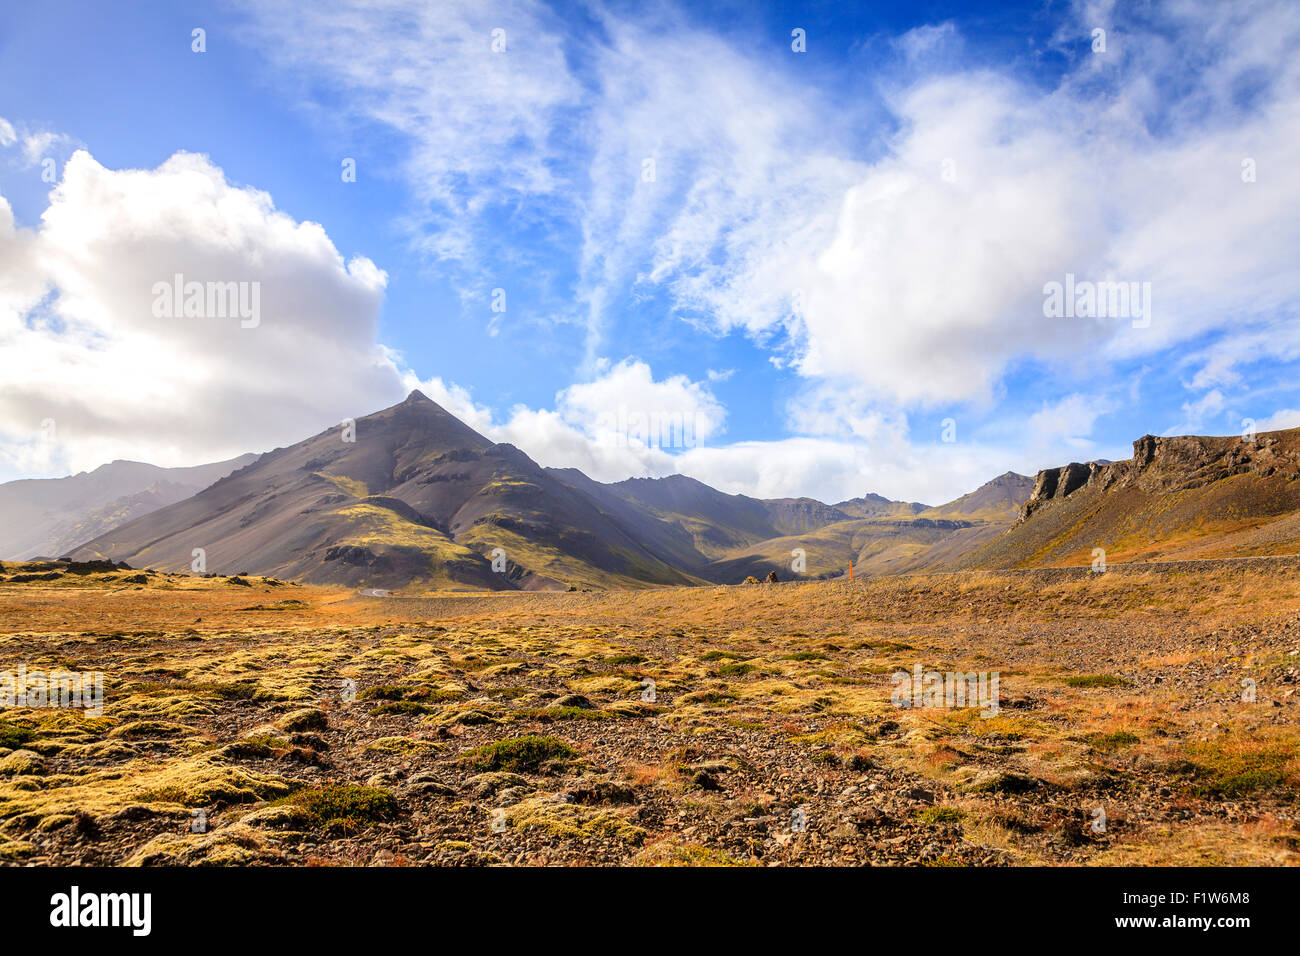 Volcanic landscape in southern part of Iceland along Highway No. 1 (Ring Road) Stock Photo